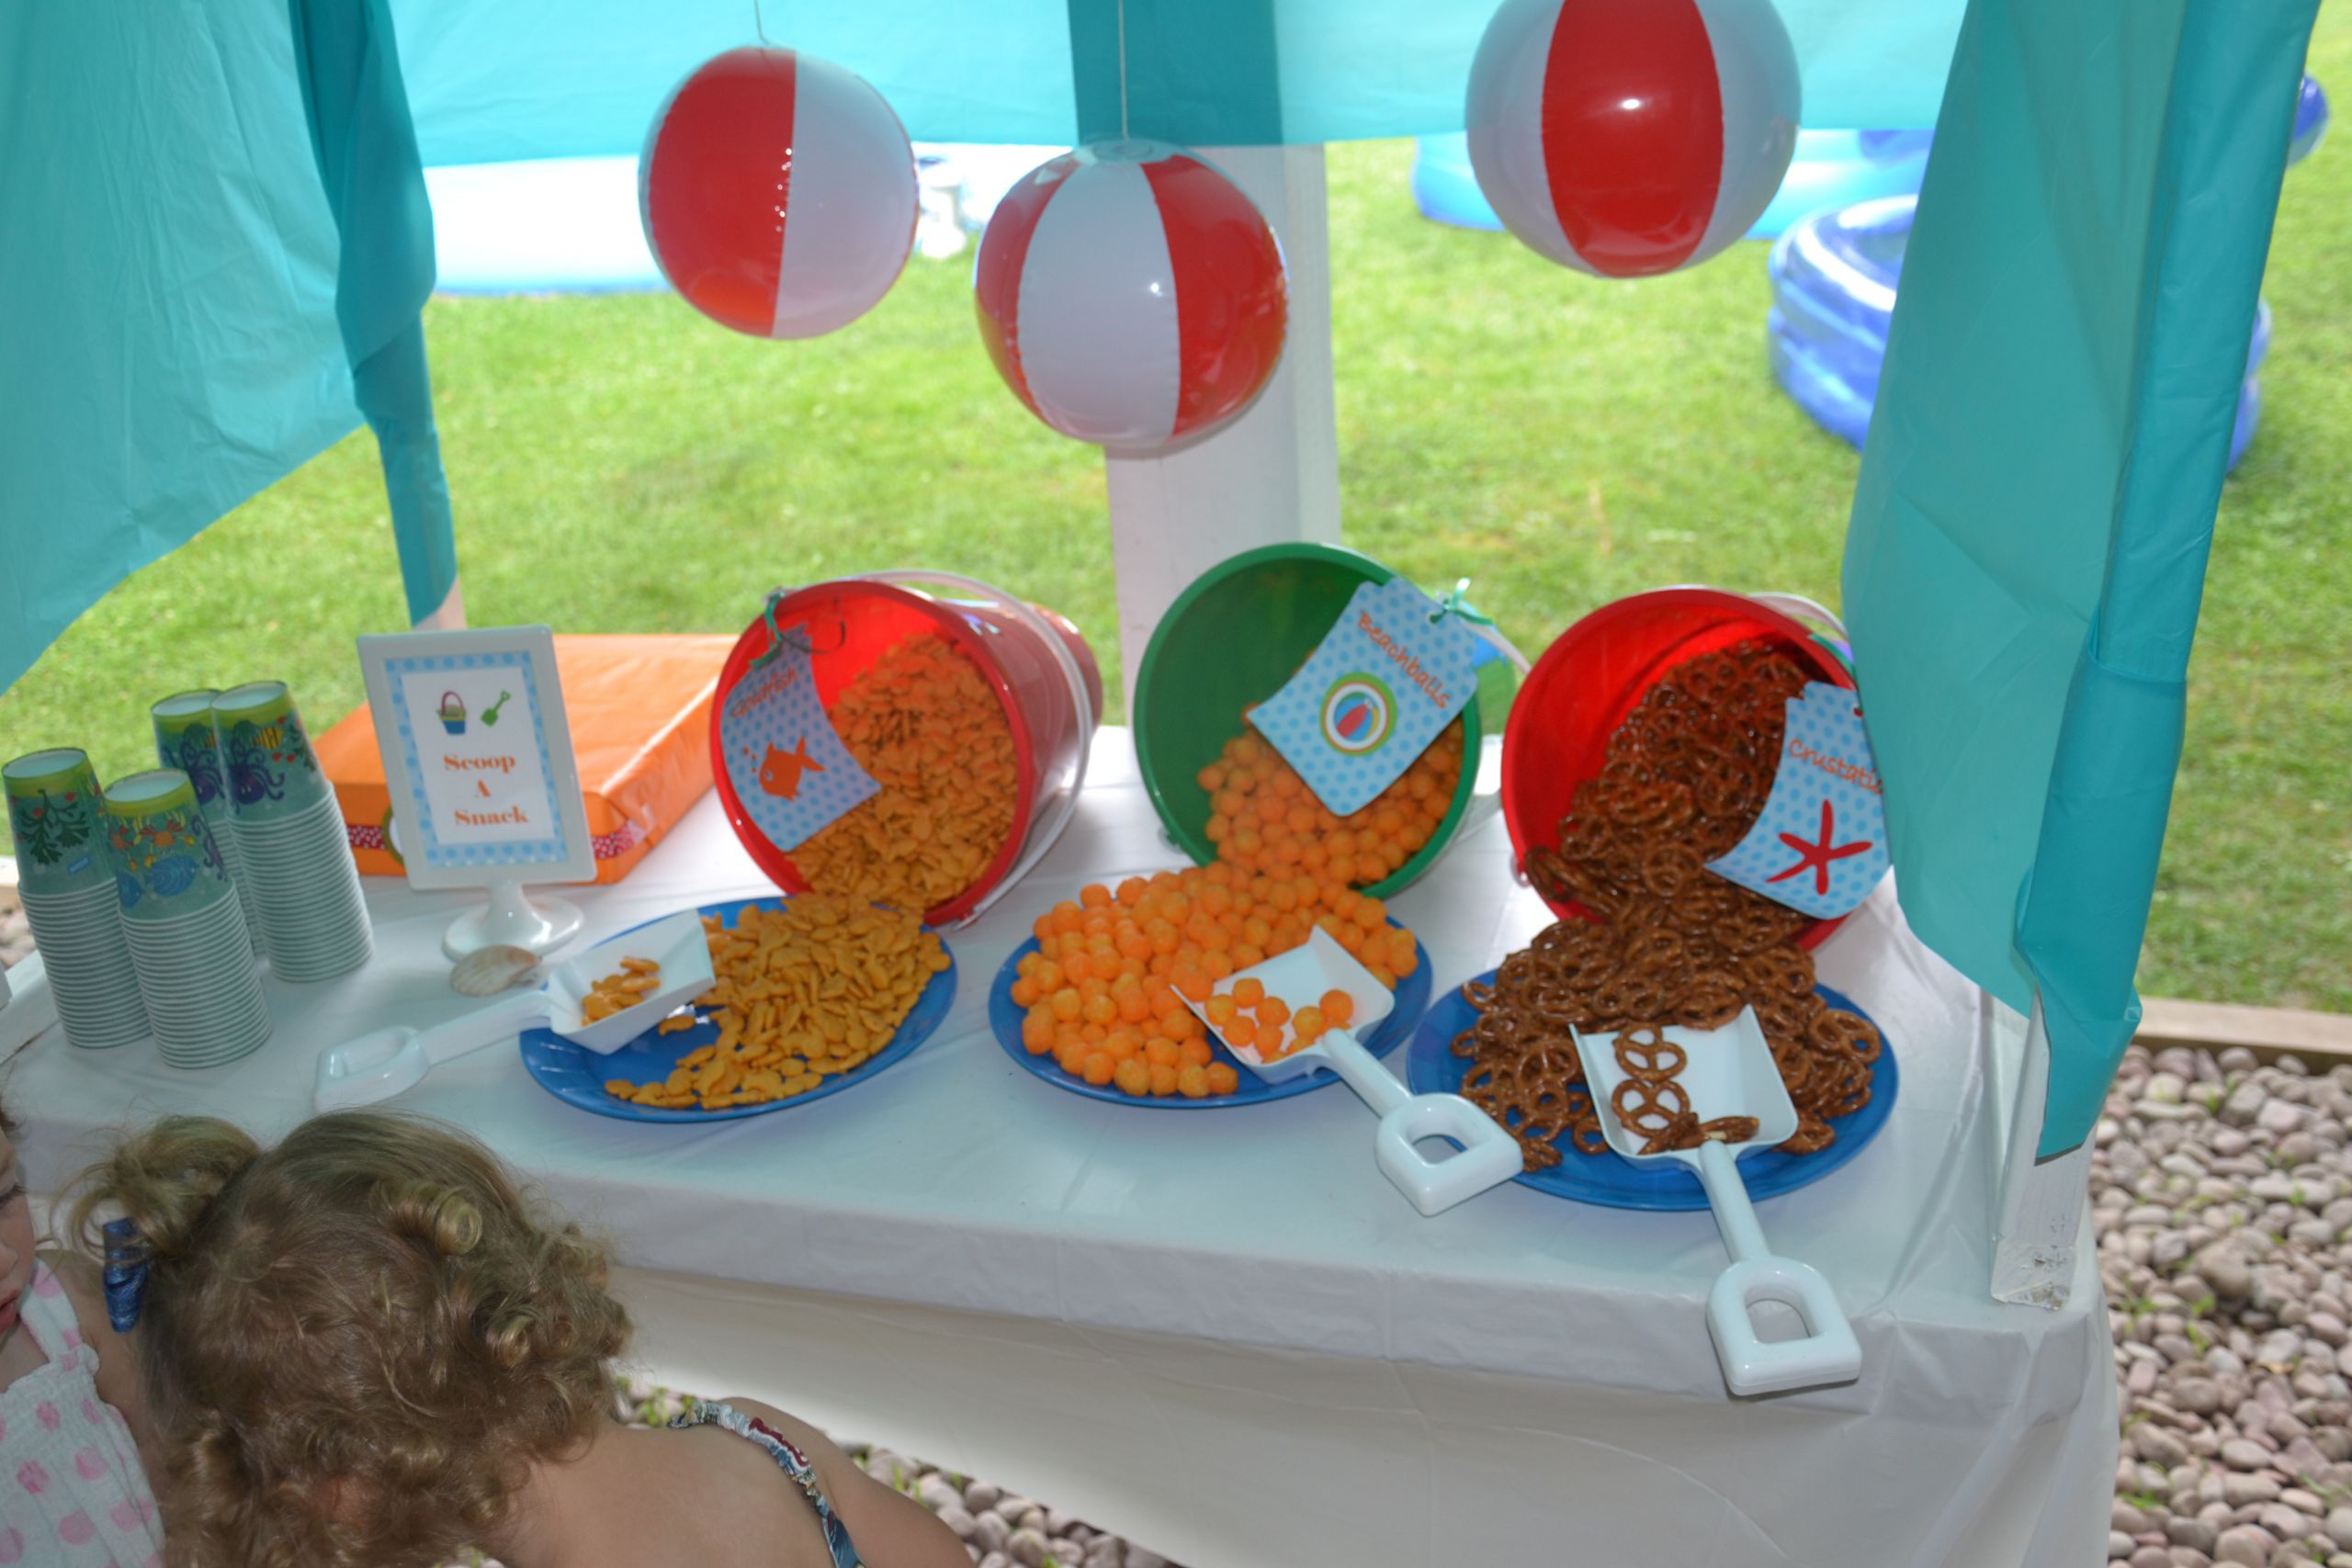 Beach Theme Party Food Ideas
 Party on a Bud  Ideas for Serving Summer Snacks